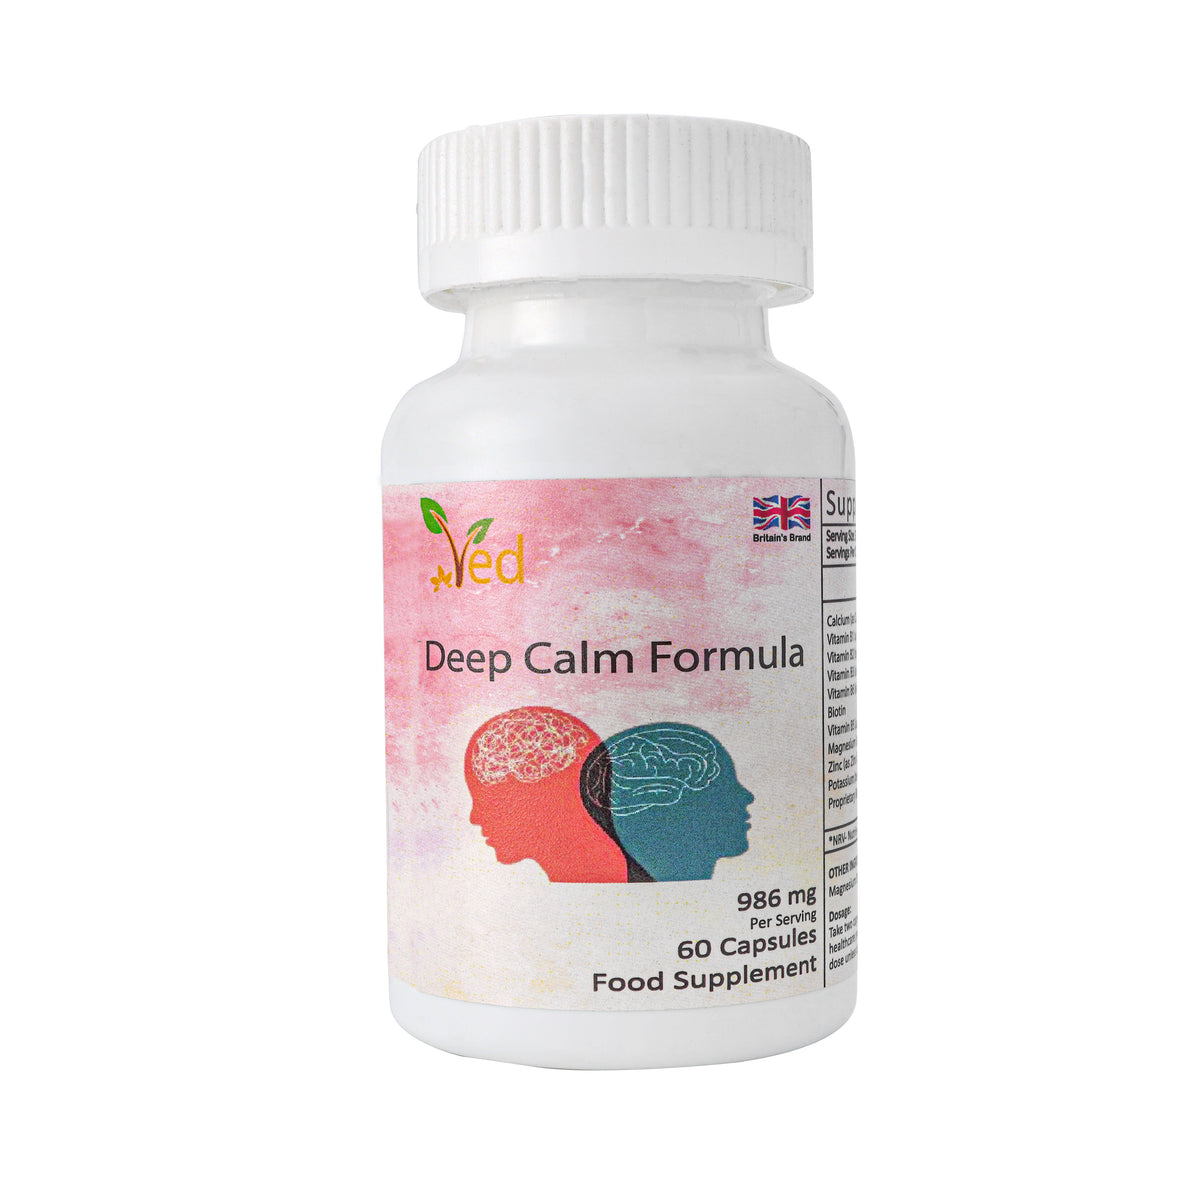 Ved Deep Calm Supplement, for The Temporary Relief of Sleep Disturbances,986mg per Serving, 60 Capsule (30 Days Supply)